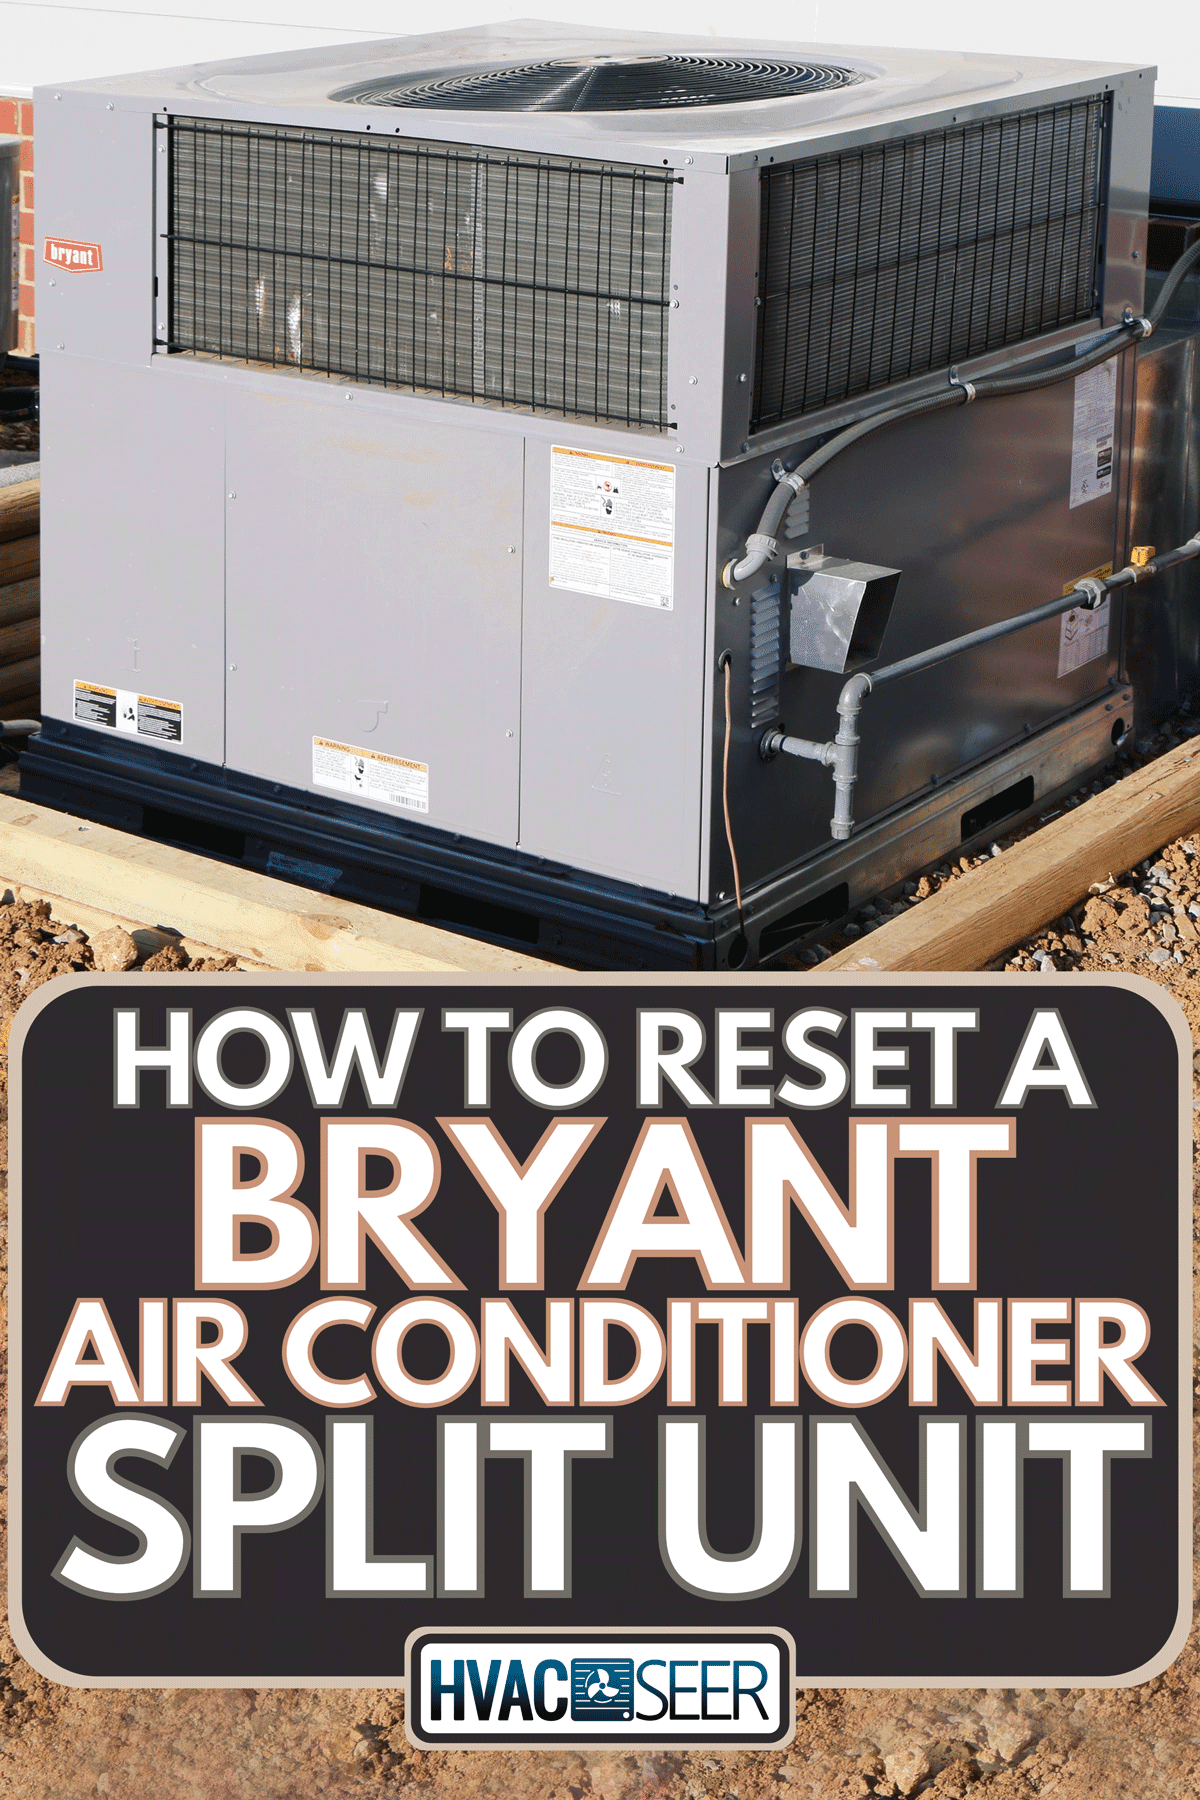 An HVAC system for a new home under construction, How To Reset A Bryant Air Conditioner Split Unit